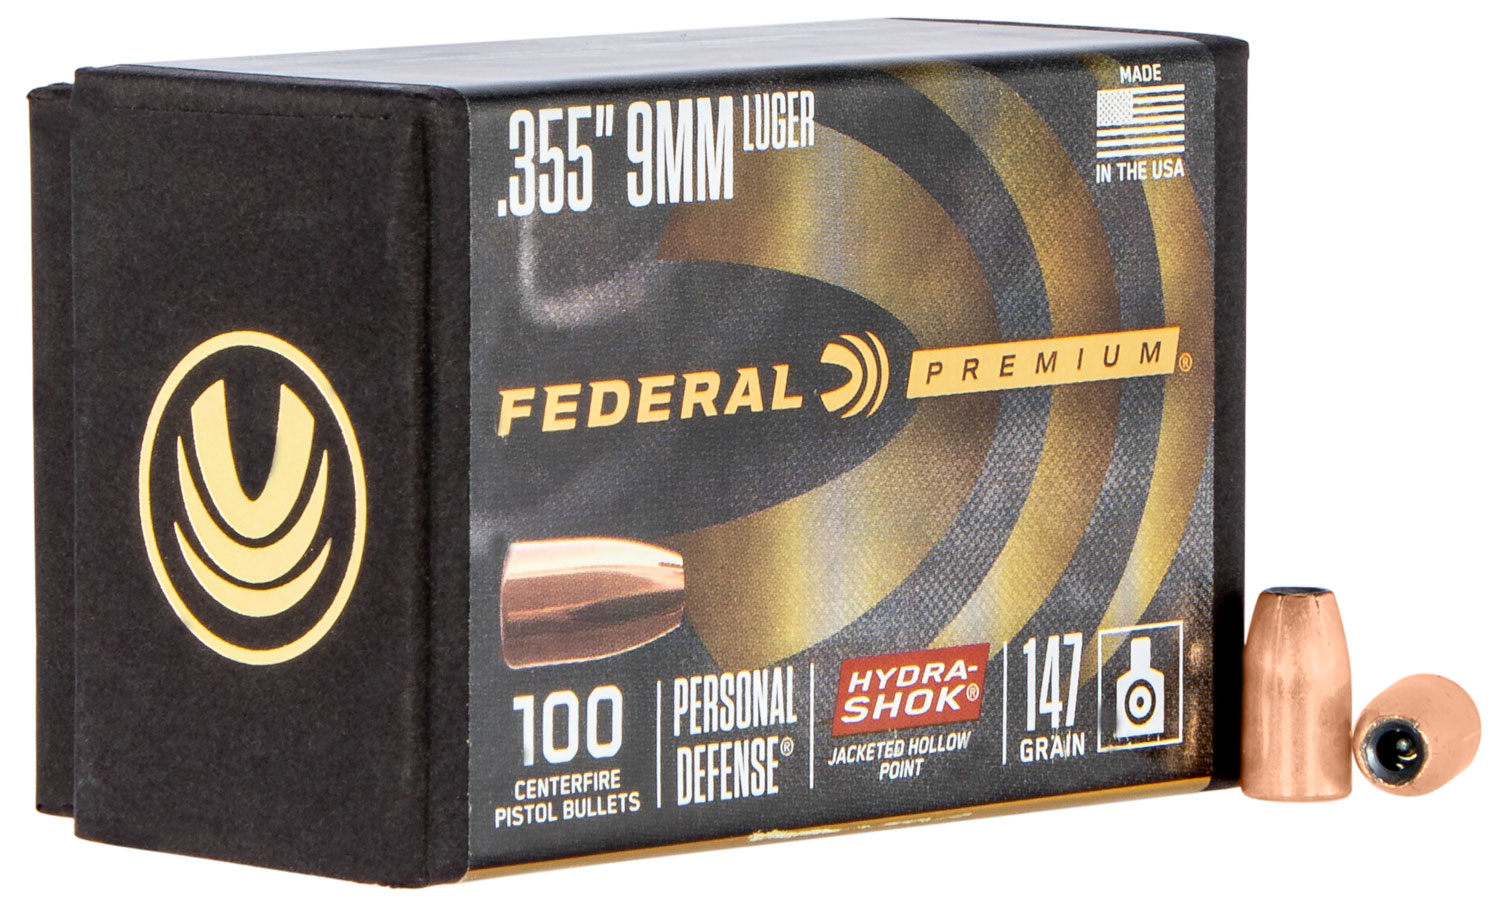 Federal PB9HS147 Hydra-Shok Component  9mm .355 147 gr Jacketed Hollow Point (JHP) 100 Per Box